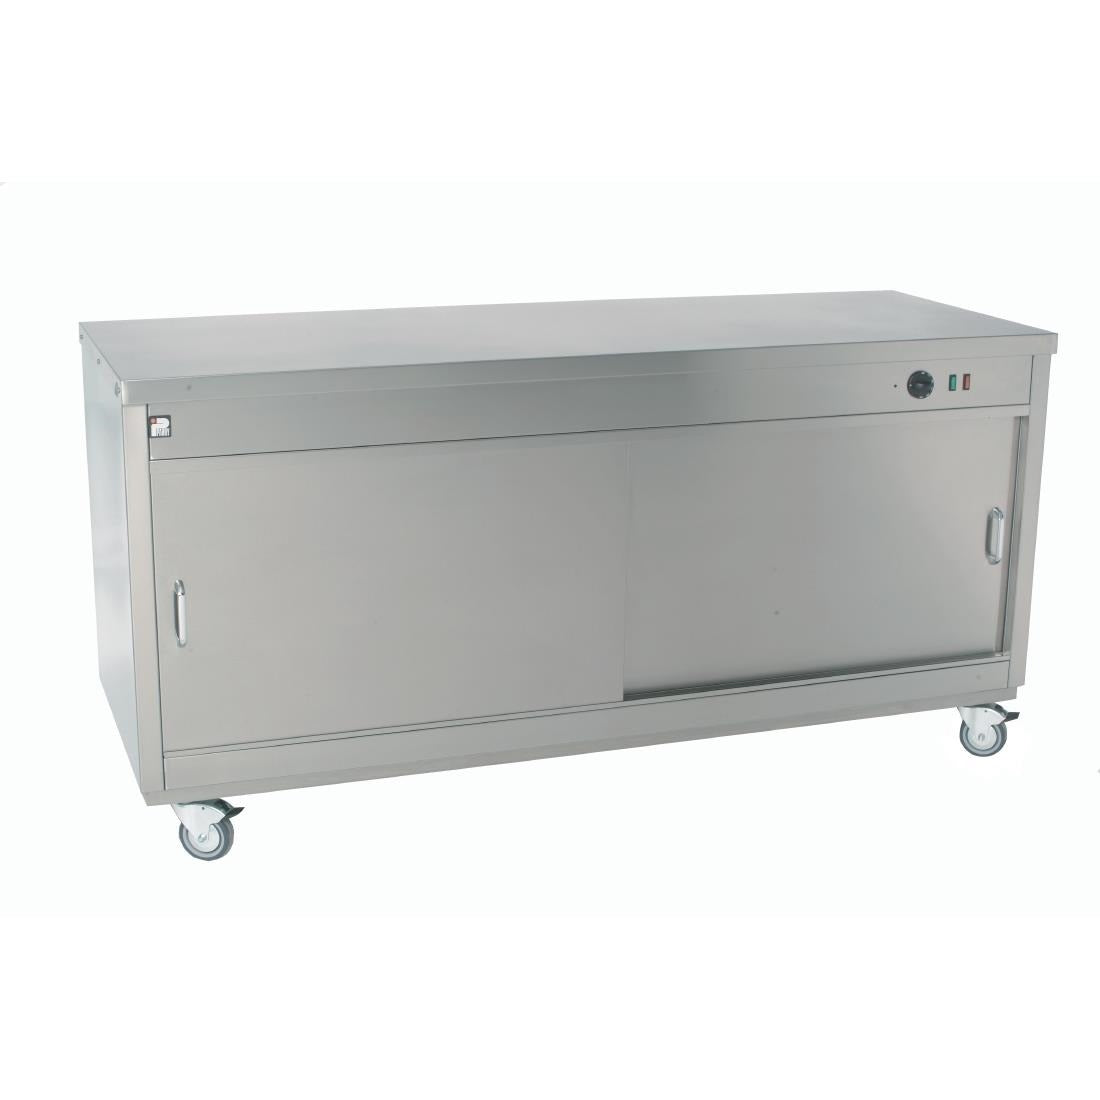 Parry Hot Cupboard HOT15 - GM713 Hot Cupboards Parry   